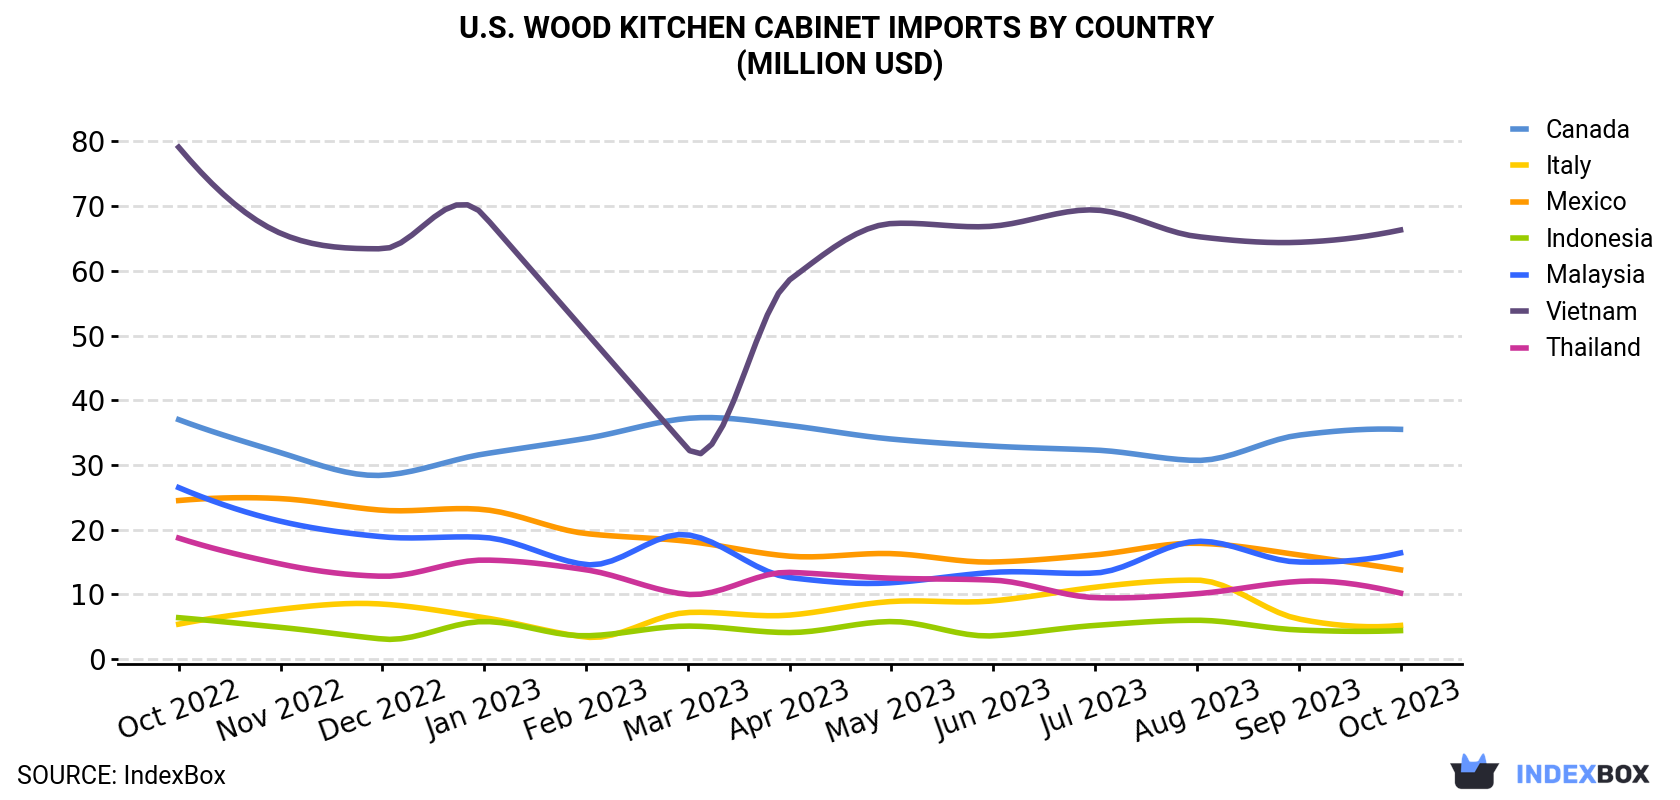 U.S. Wood Kitchen Cabinet Imports By Country (Million USD)